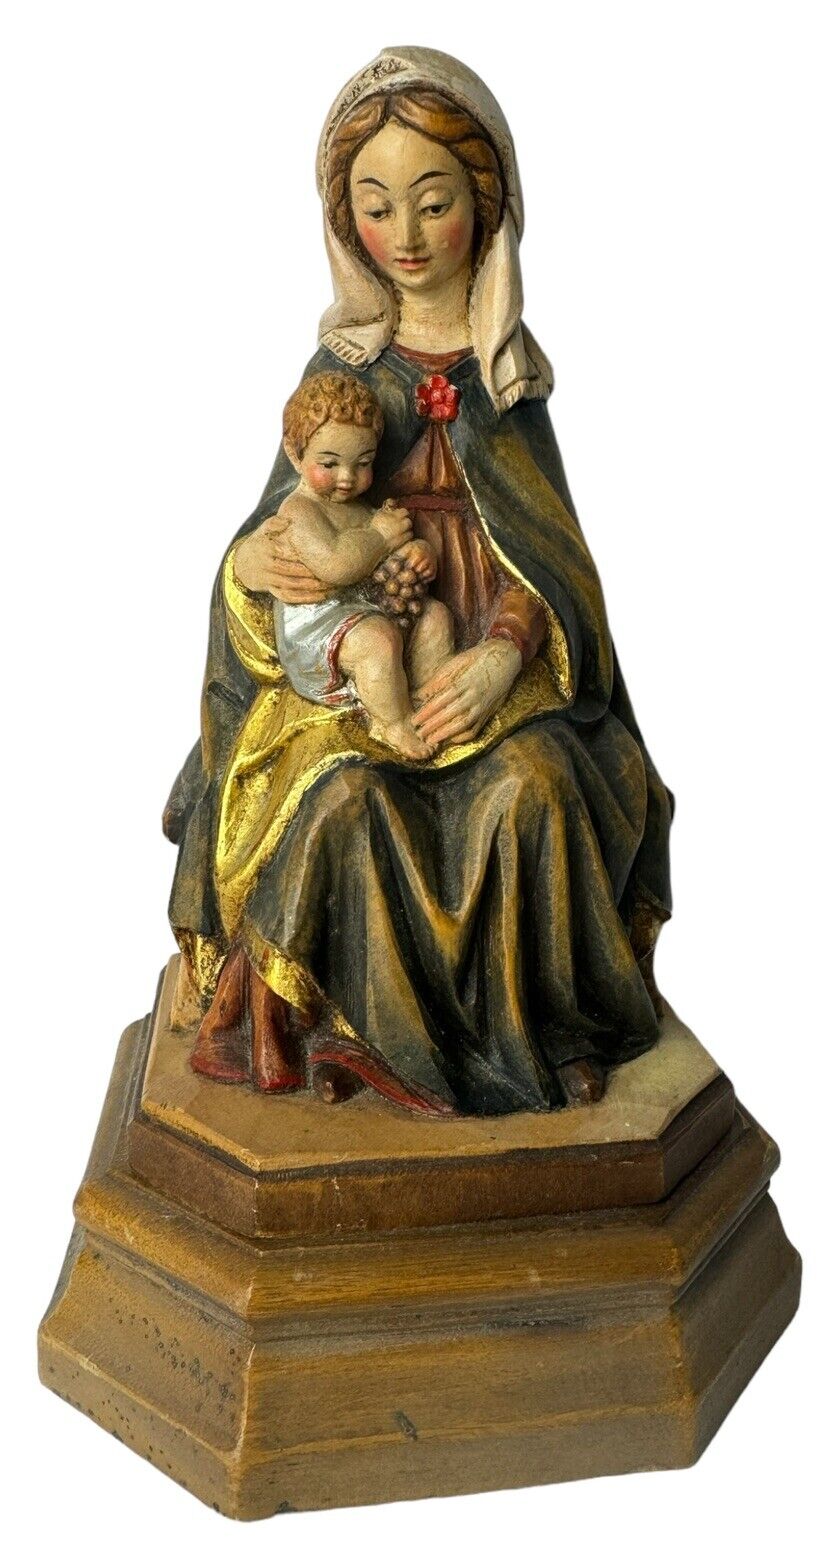 Very Rare Antique Anri Italy Madonna Virgin Mary Hand Carved Wood Statue 8”